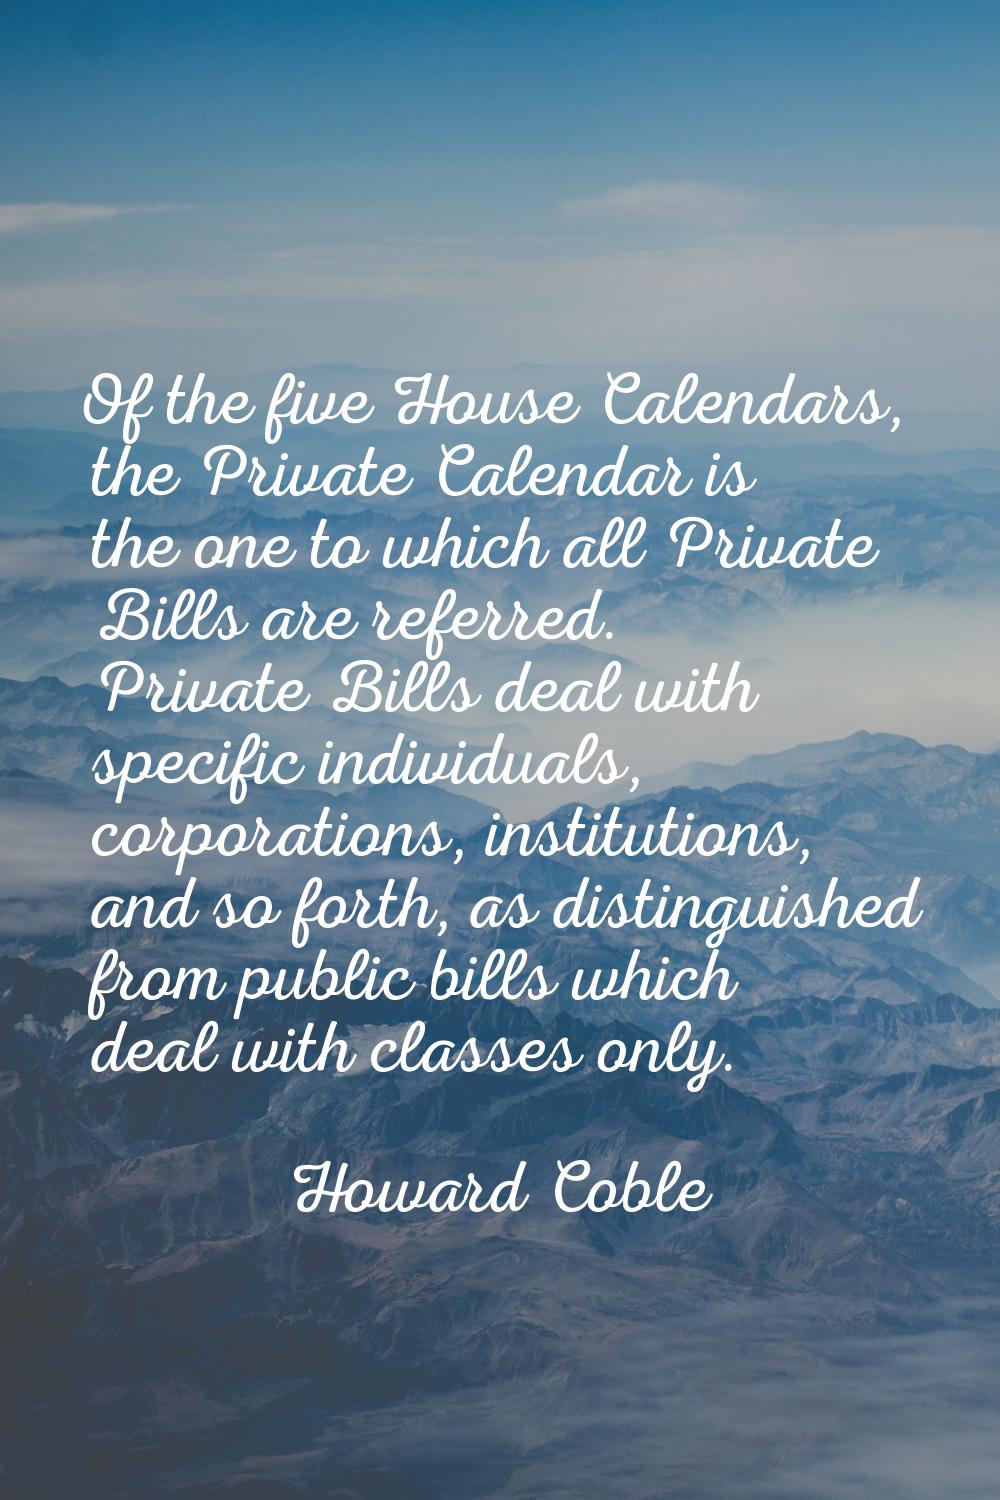 Of the five House Calendars, the Private Calendar is the one to which all Private Bills are referre